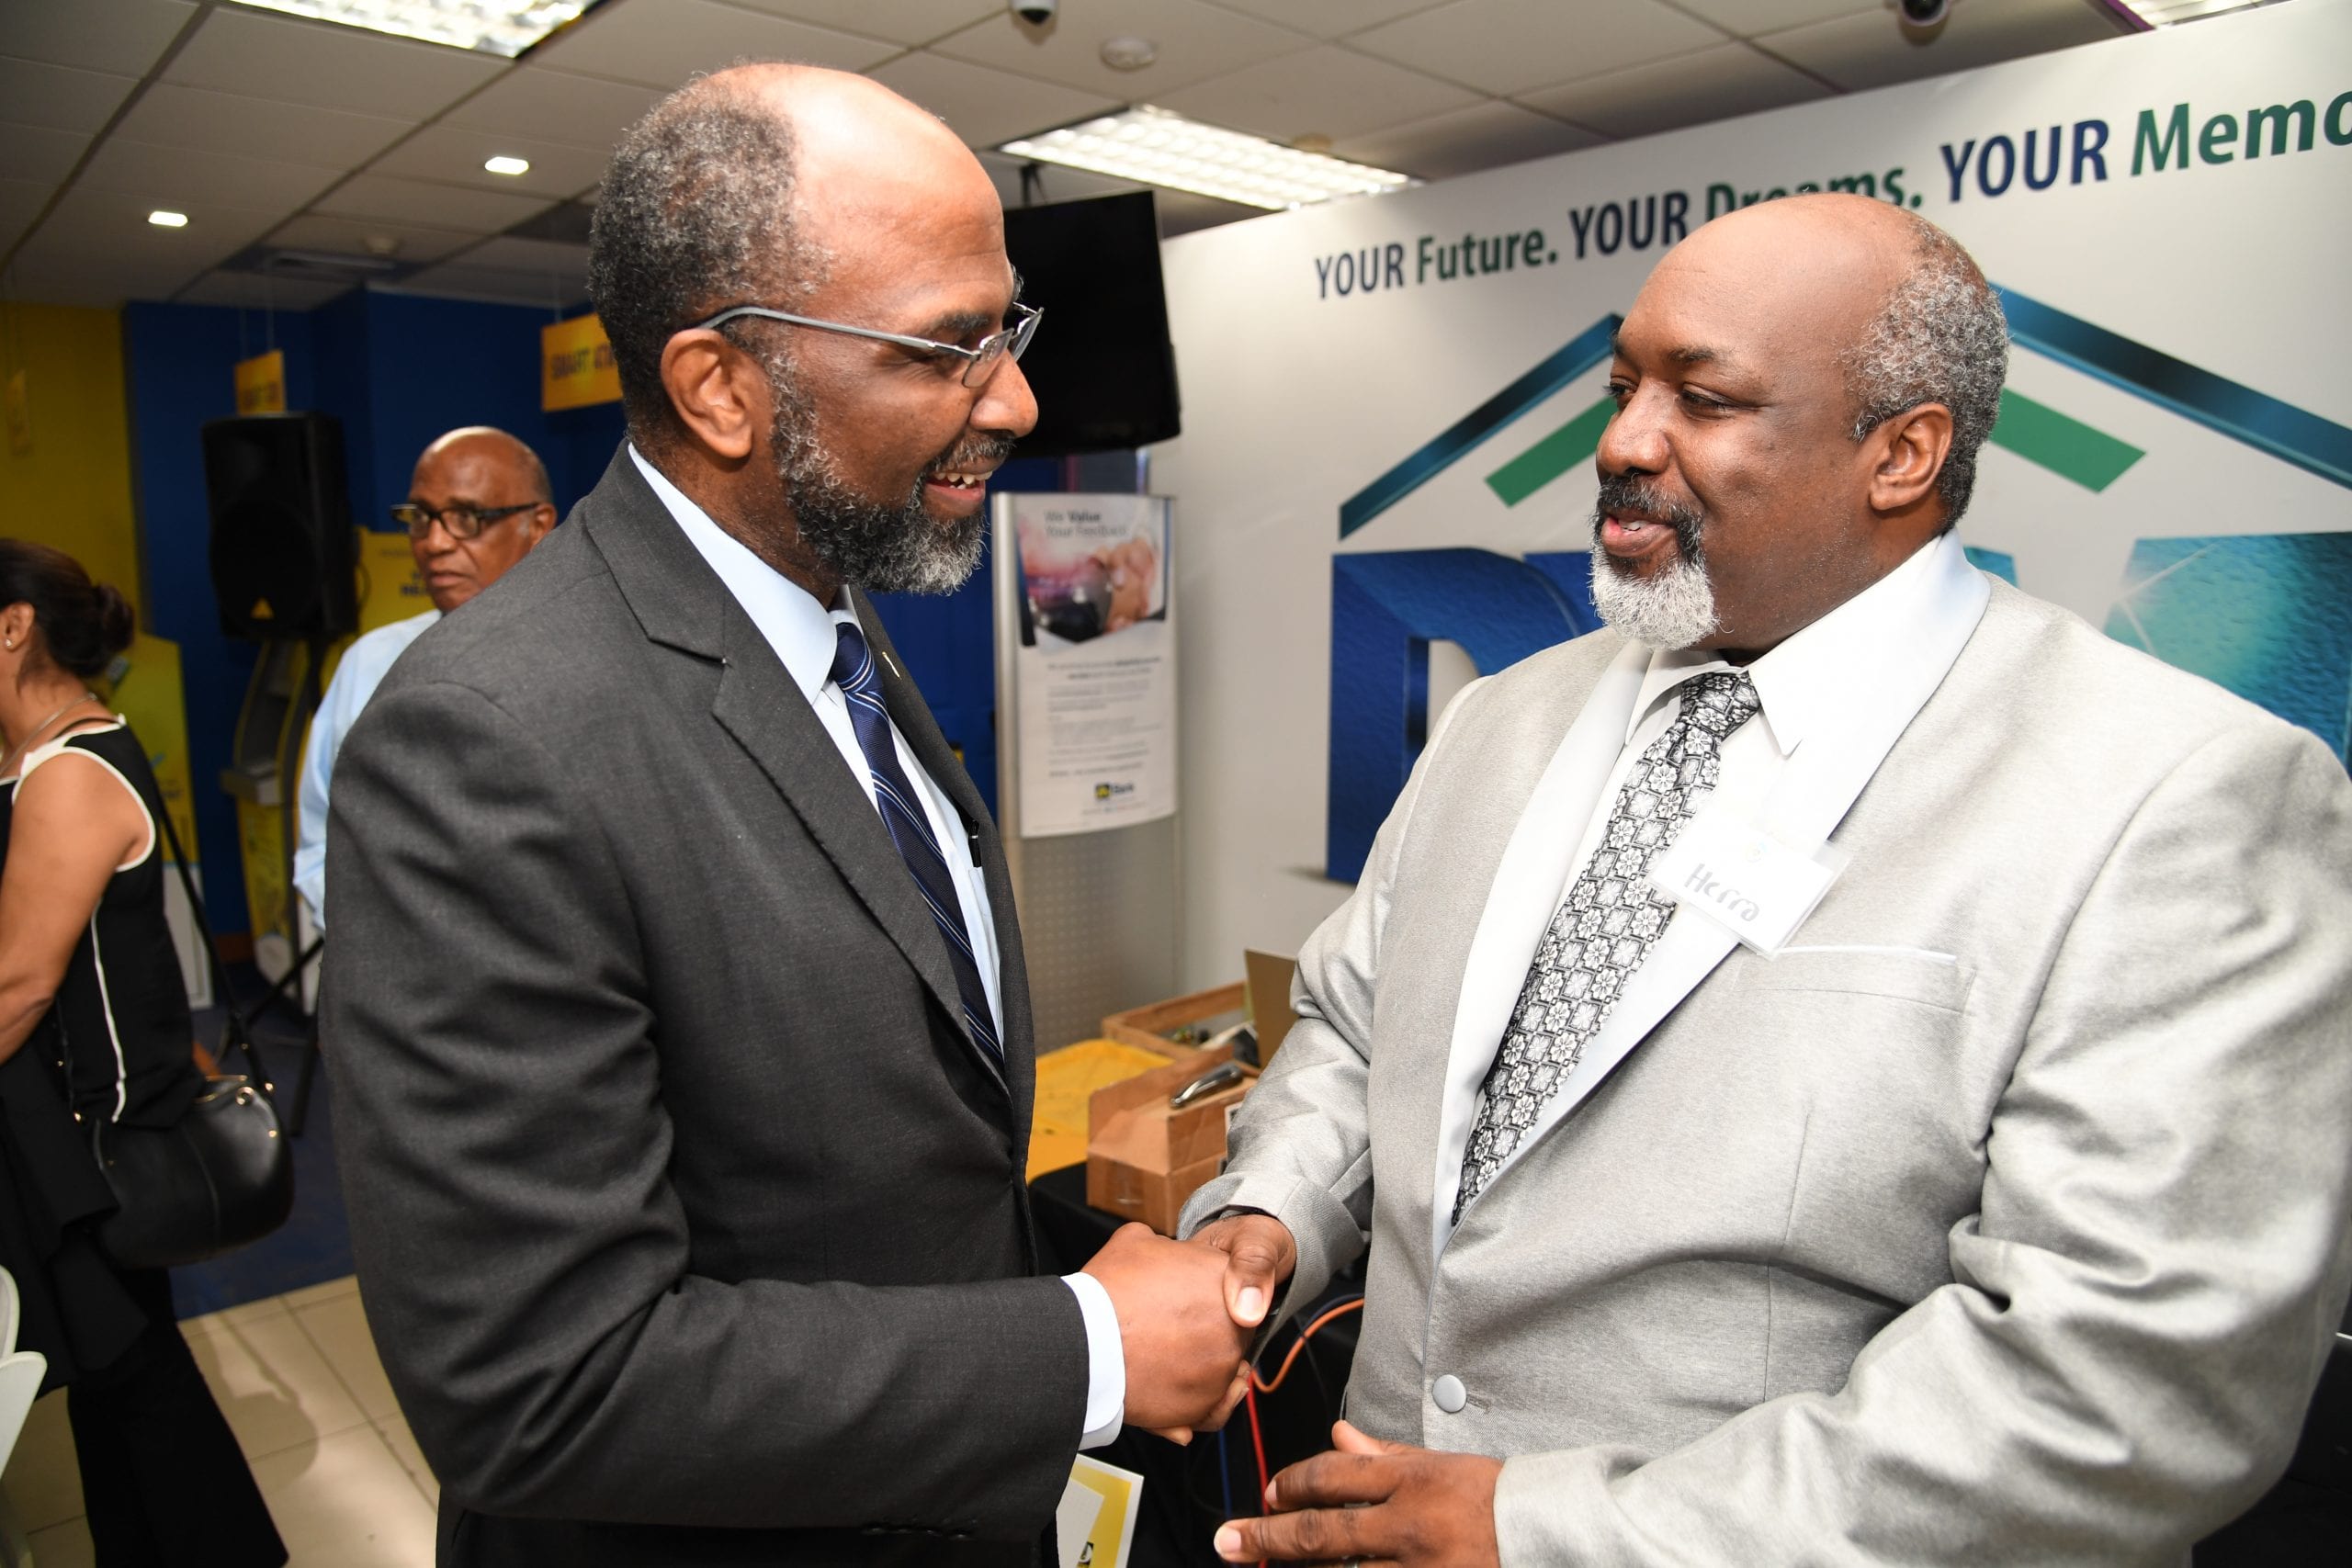 The Jamaica National Group Introduces JN Circle Initiative to Members